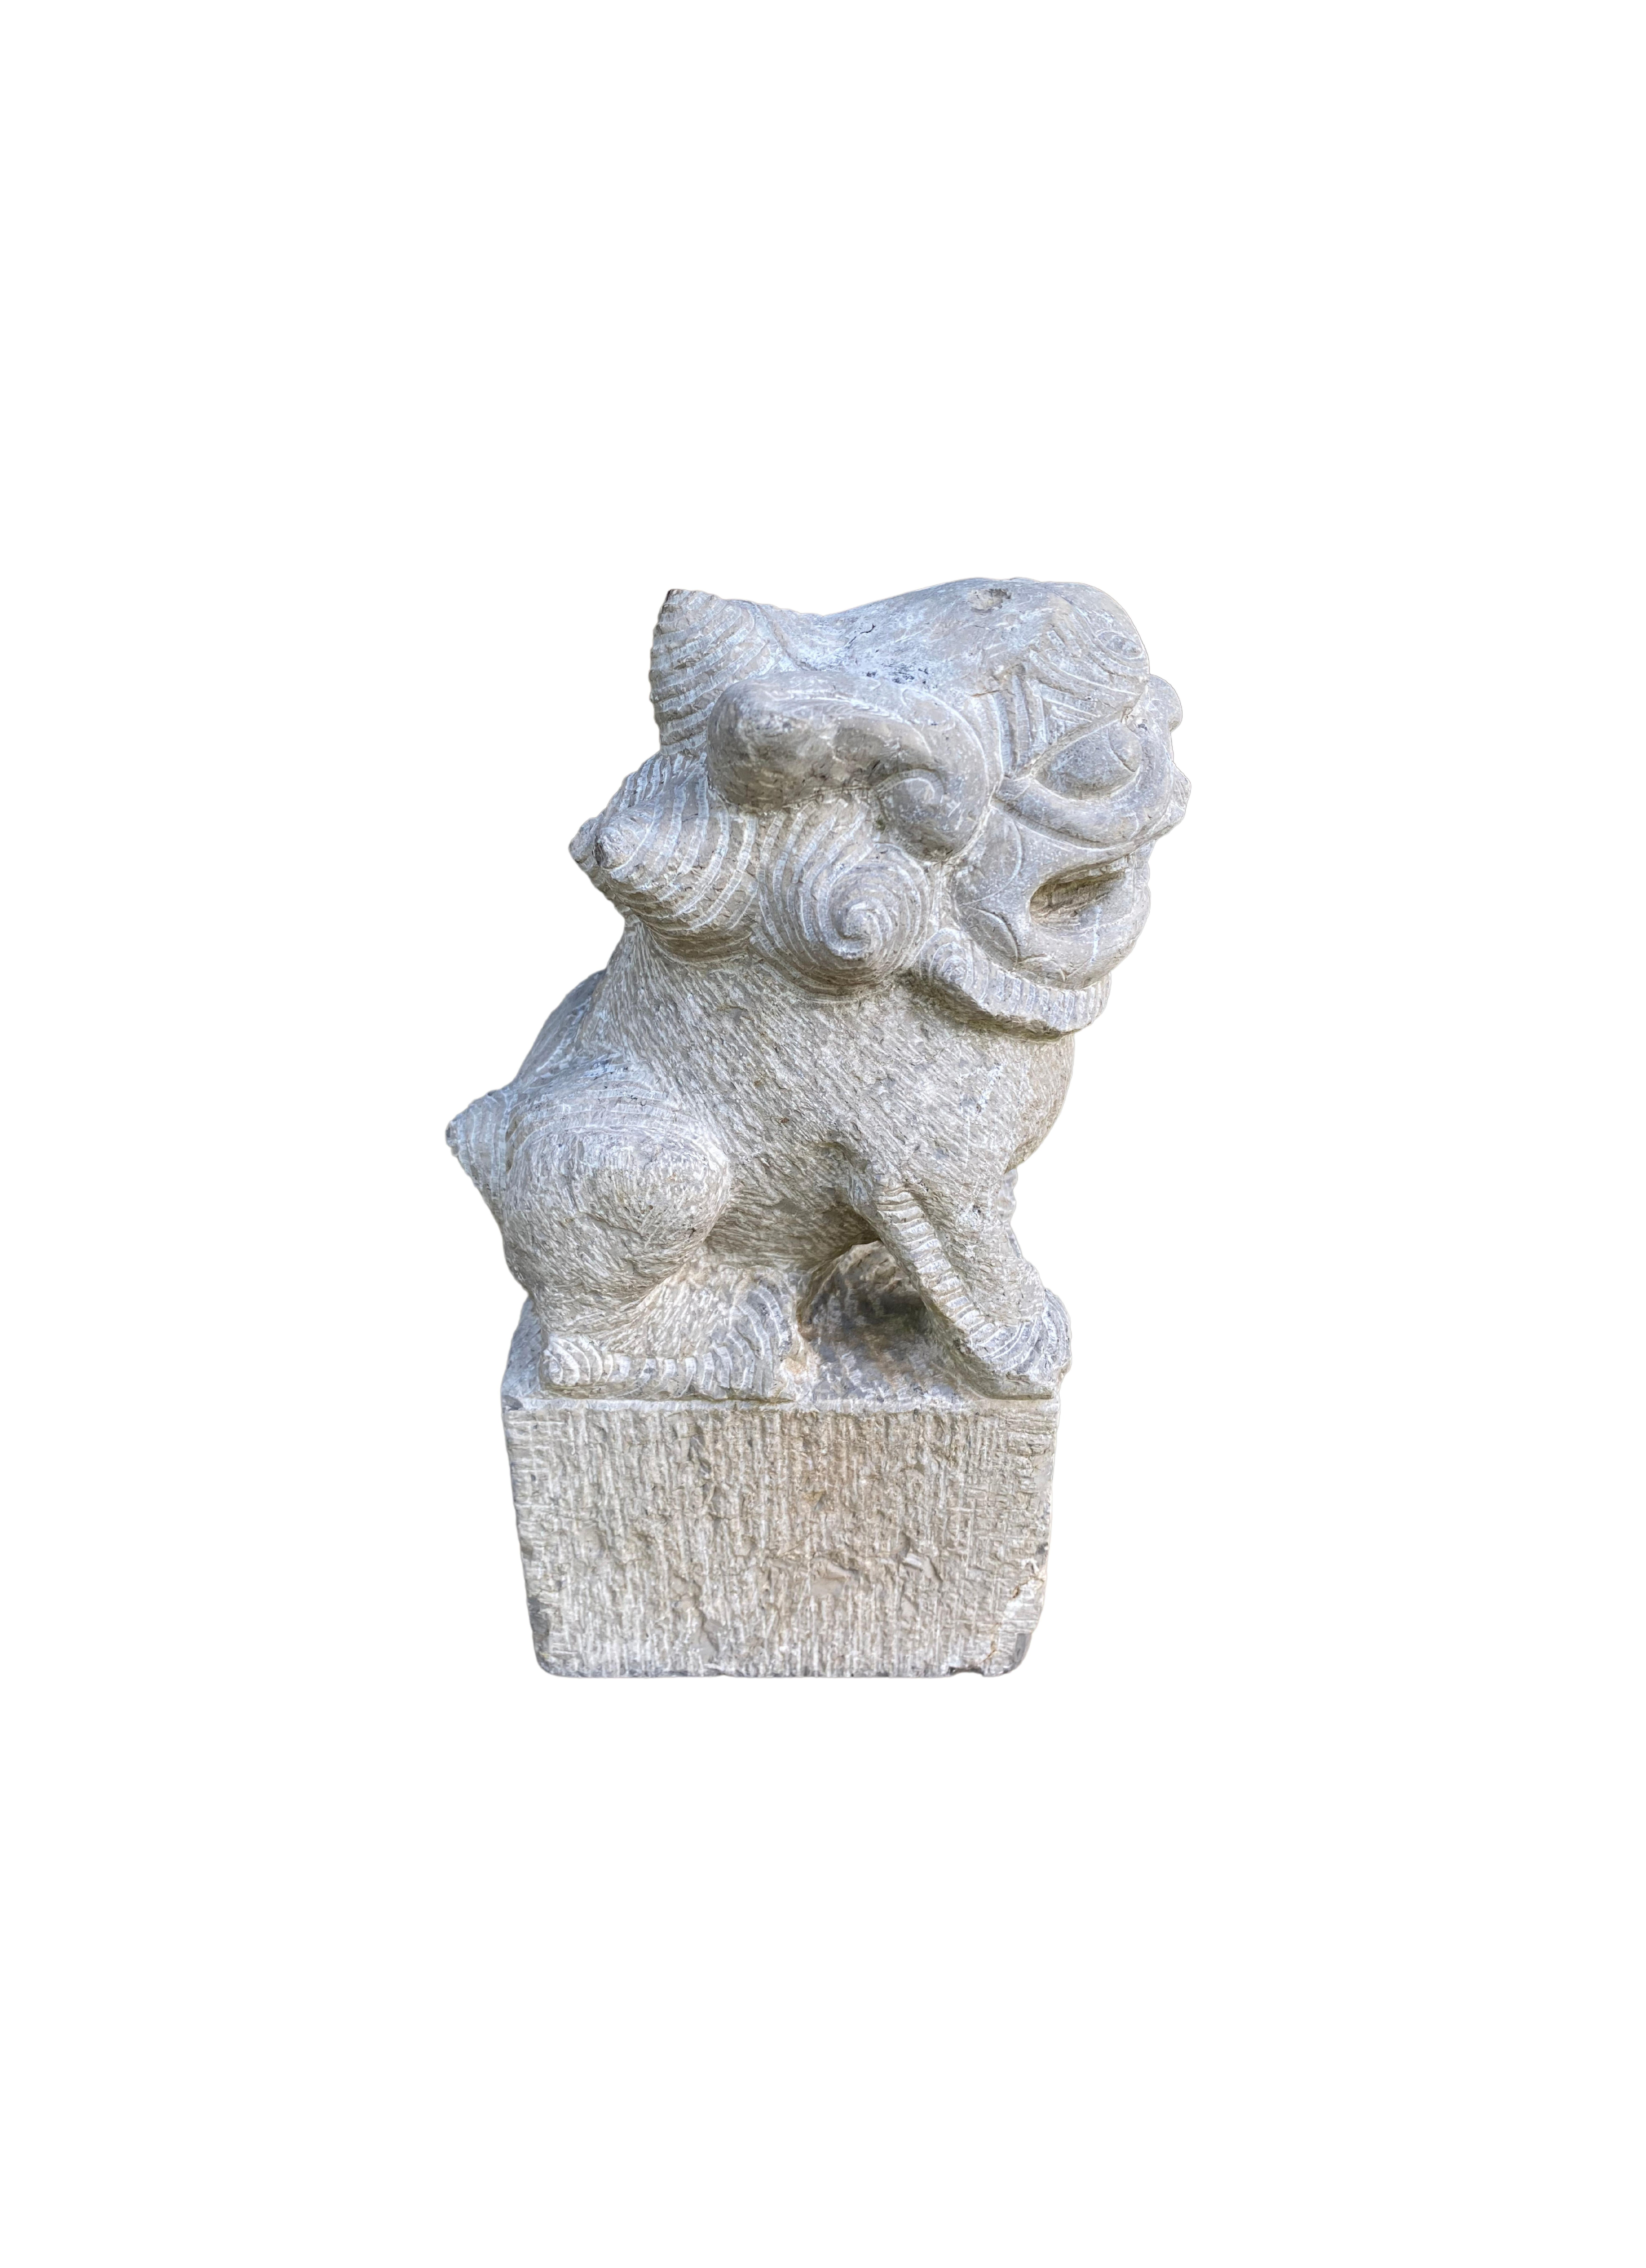 Chinese Limestone Fu Dog Guardian Figure from China, c. 1900 For Sale